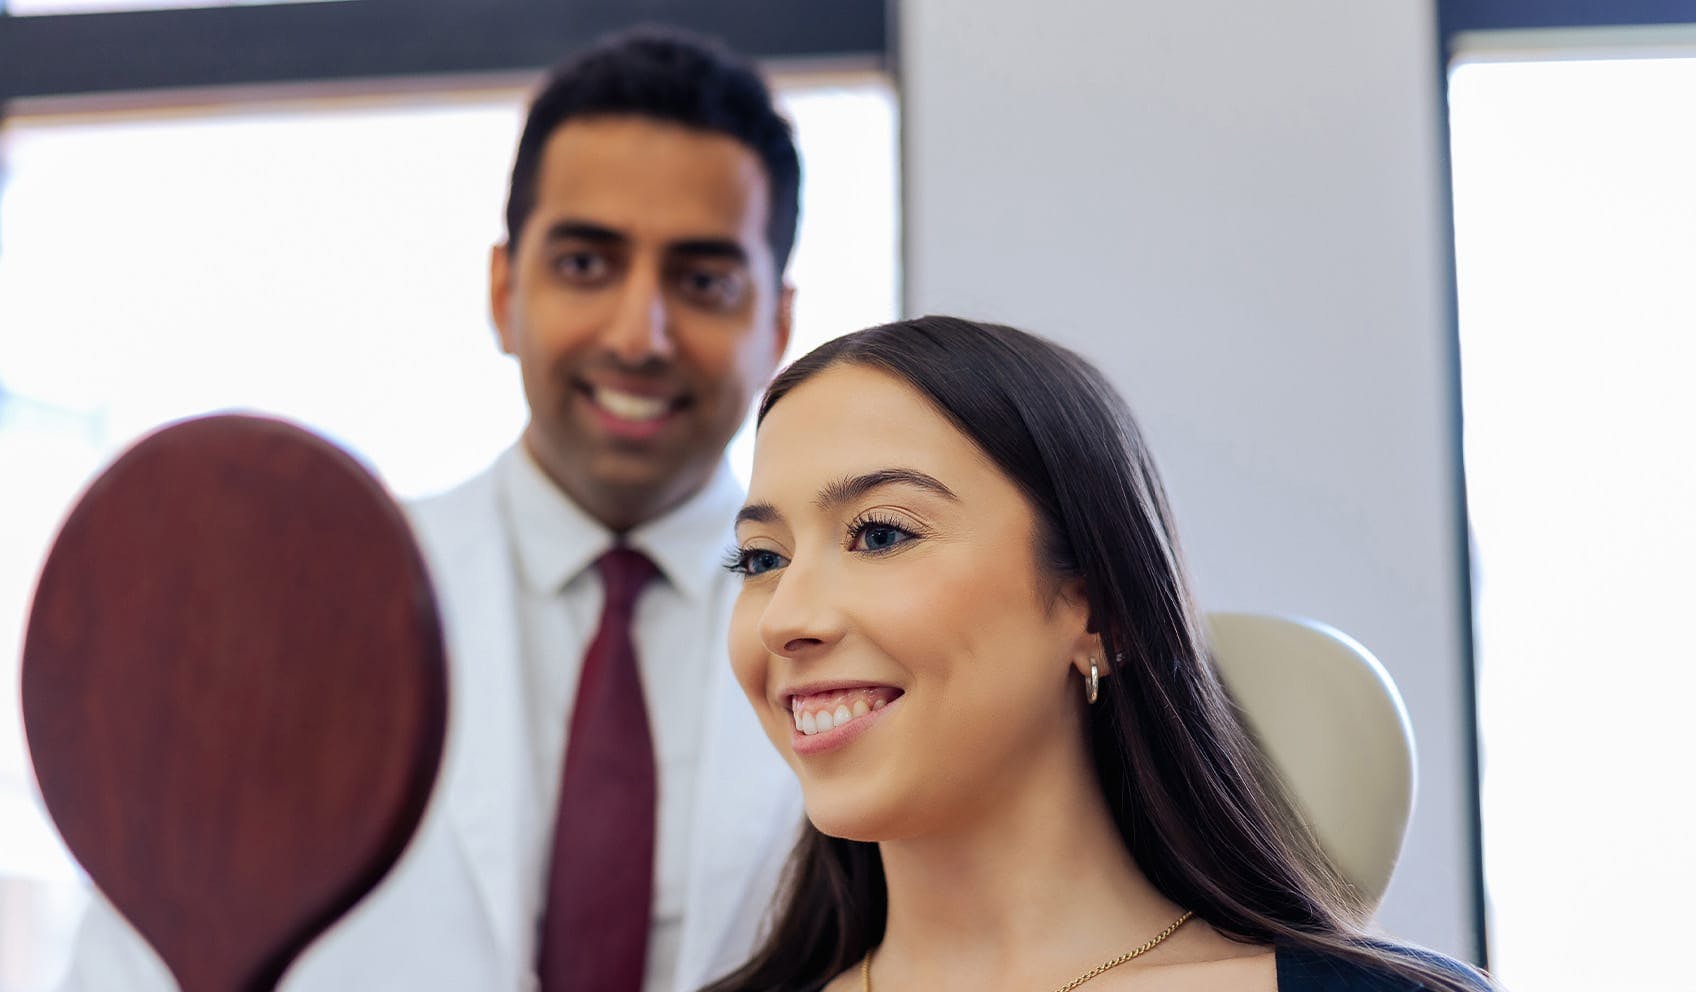 Doctor holding up mirror to smiling patient